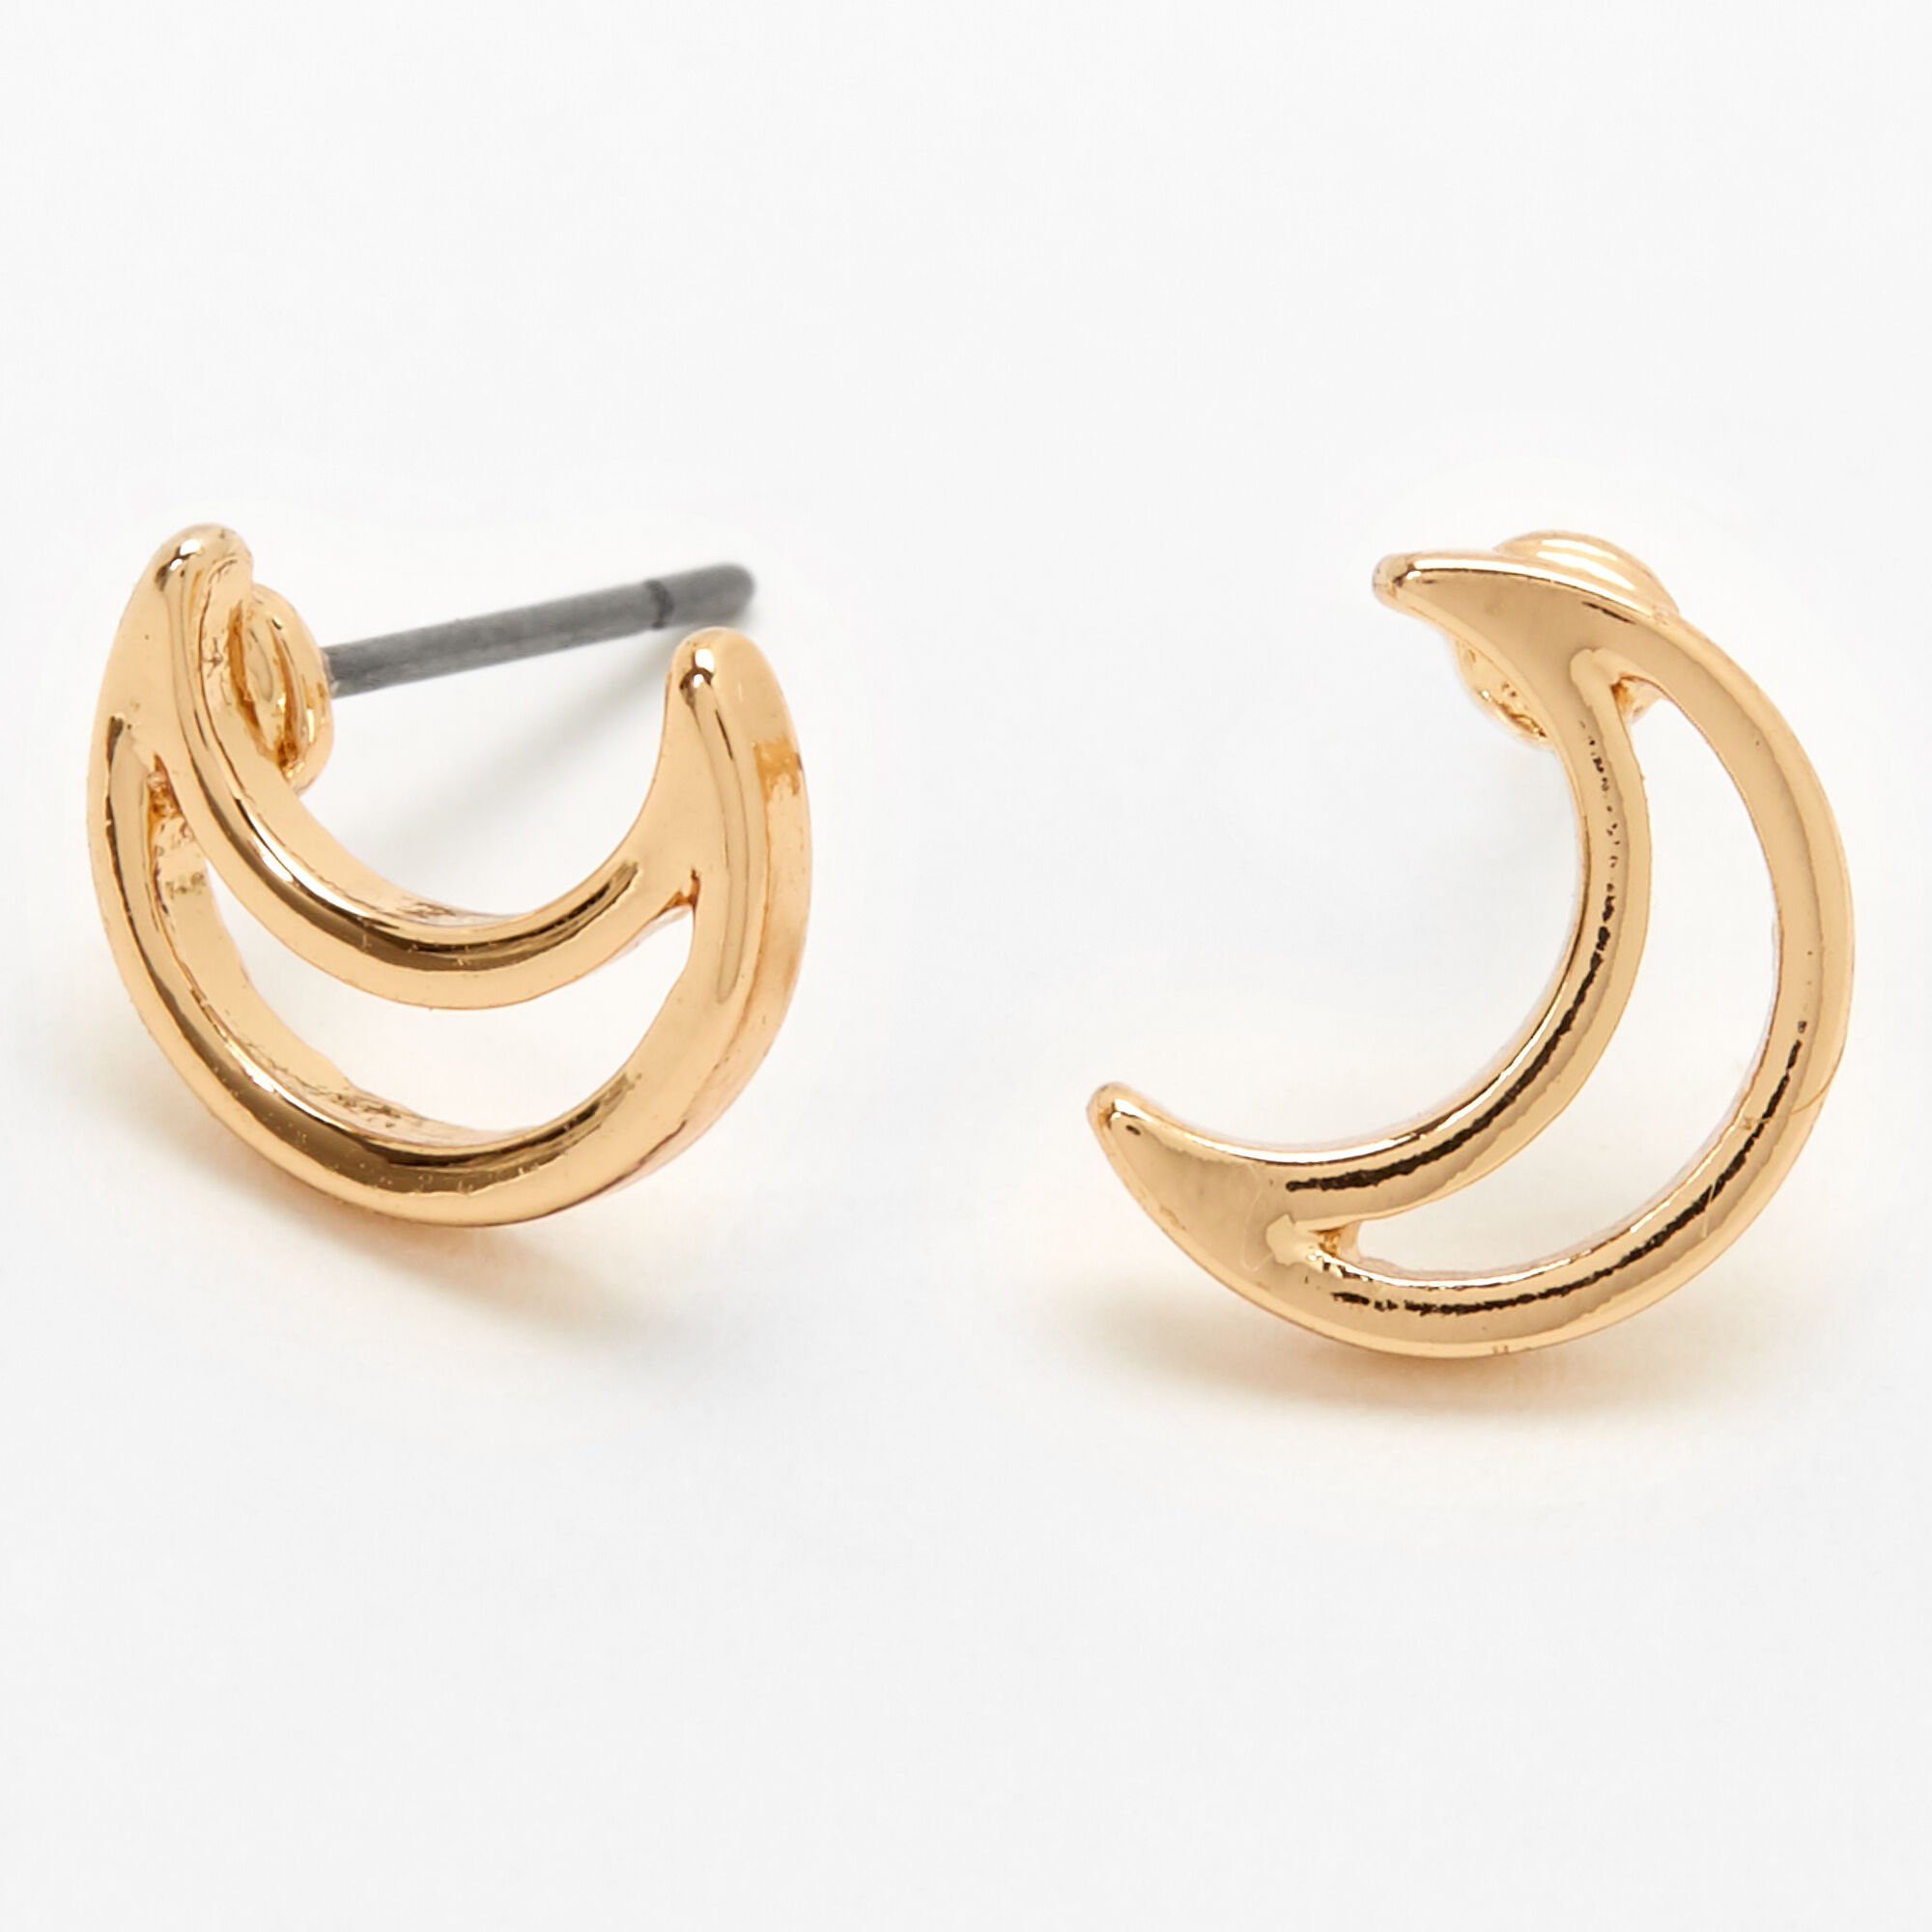 View Claires Crescent Moon Outline Stud Earrings Gold information